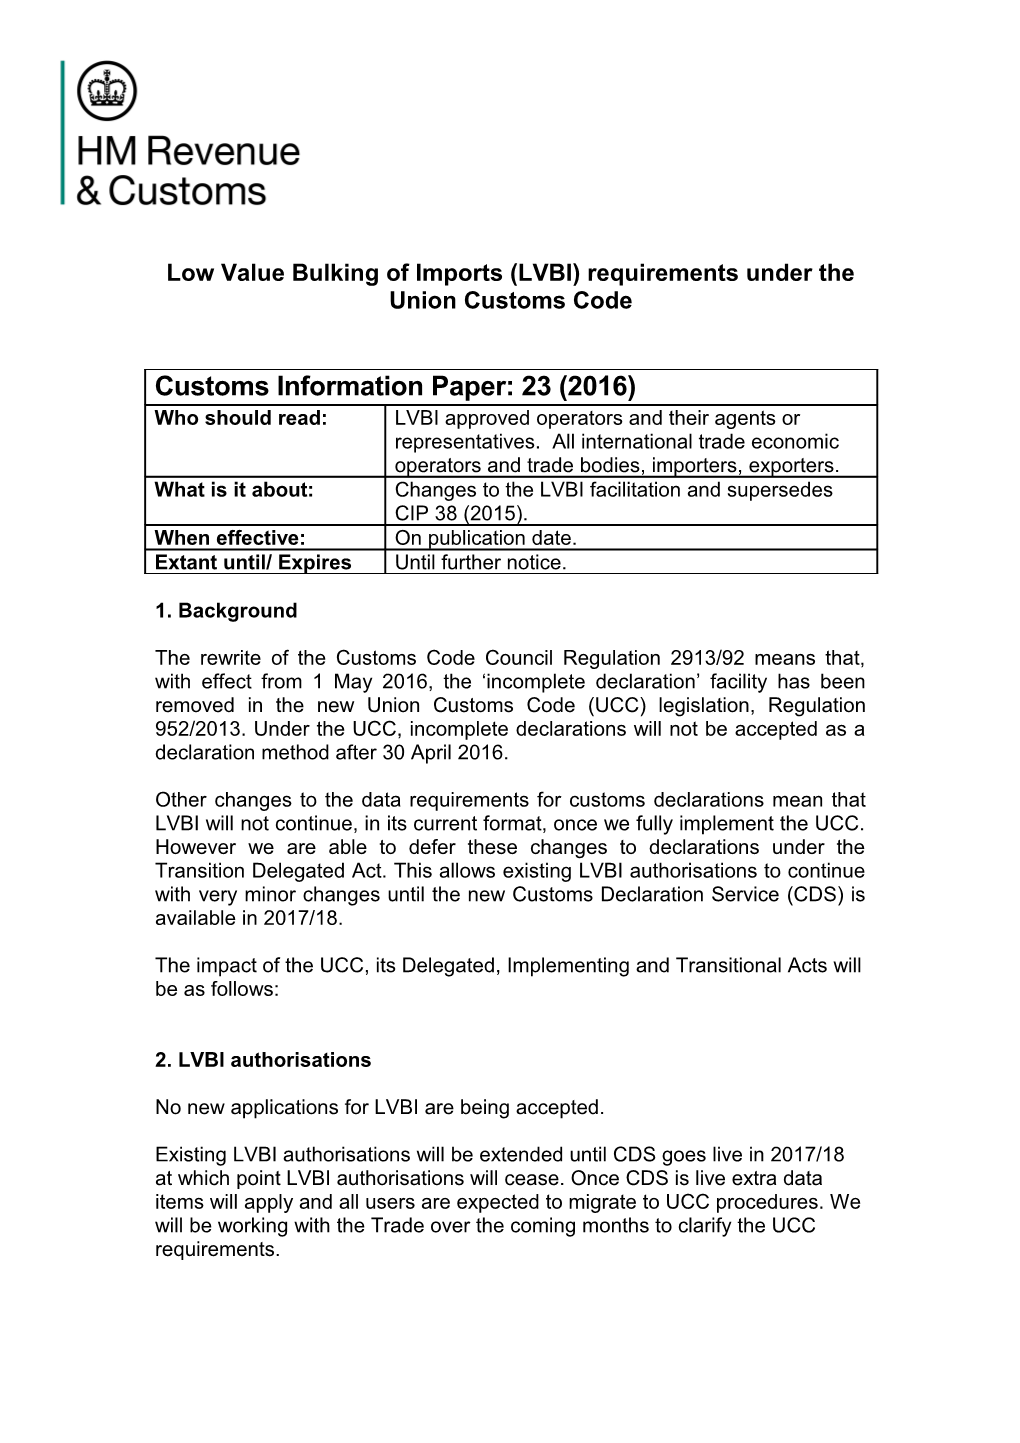 Low Value Bulking of Imports (LVBI) Requirements Under the Union Customs Code